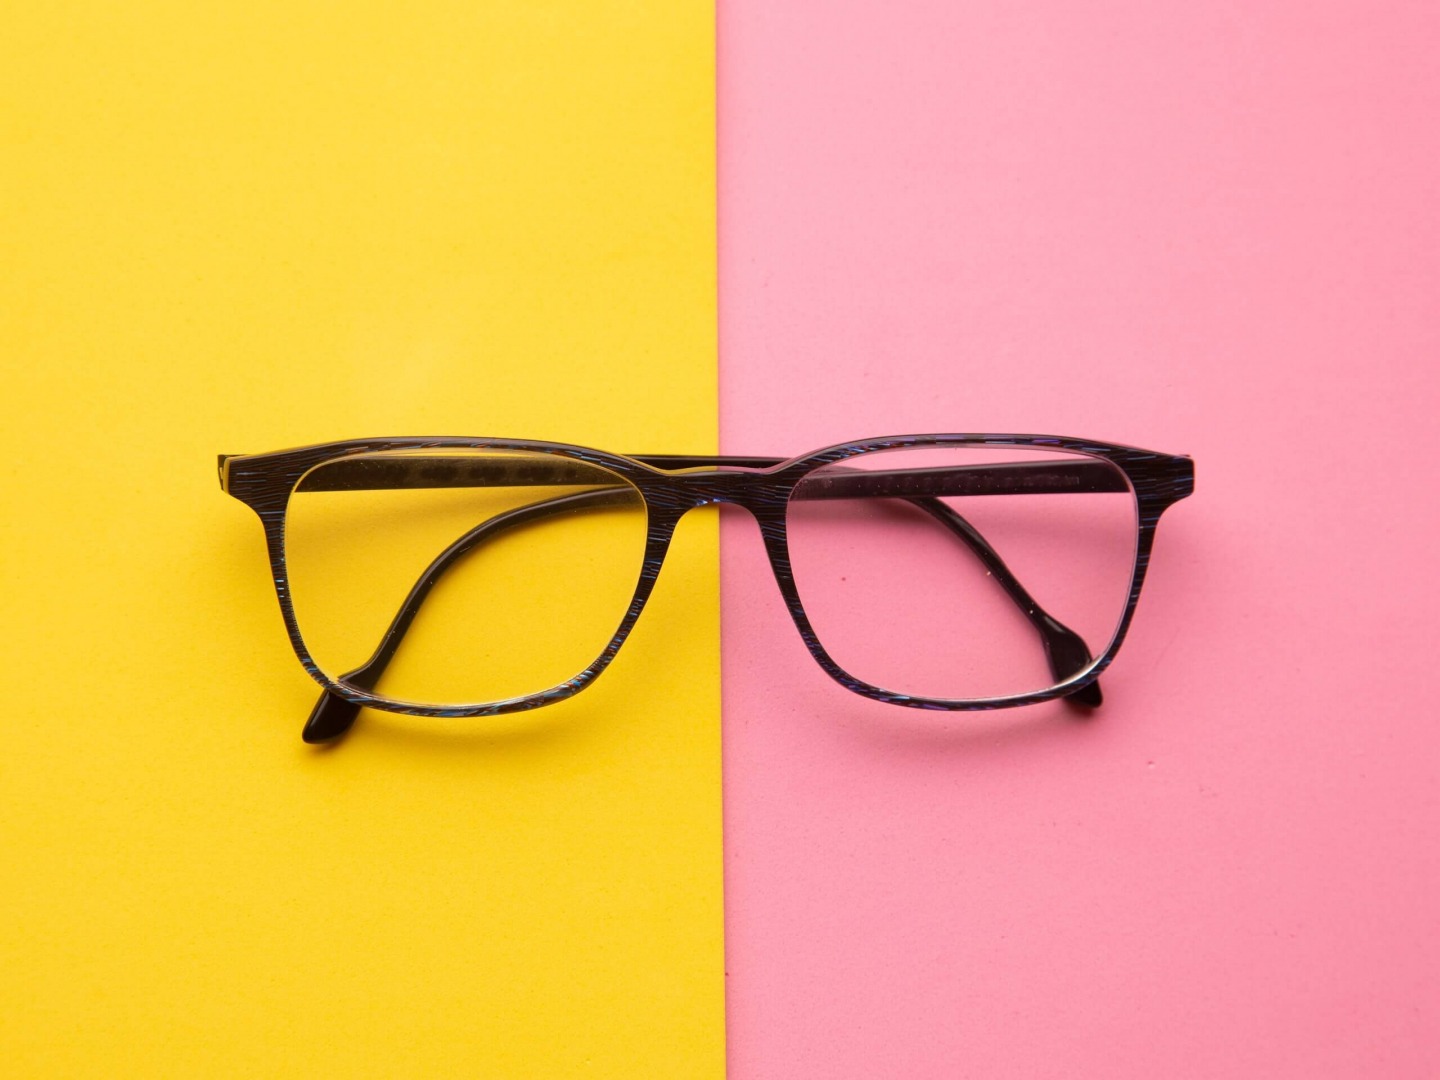 What Should I Know When Ordering New Glasses?